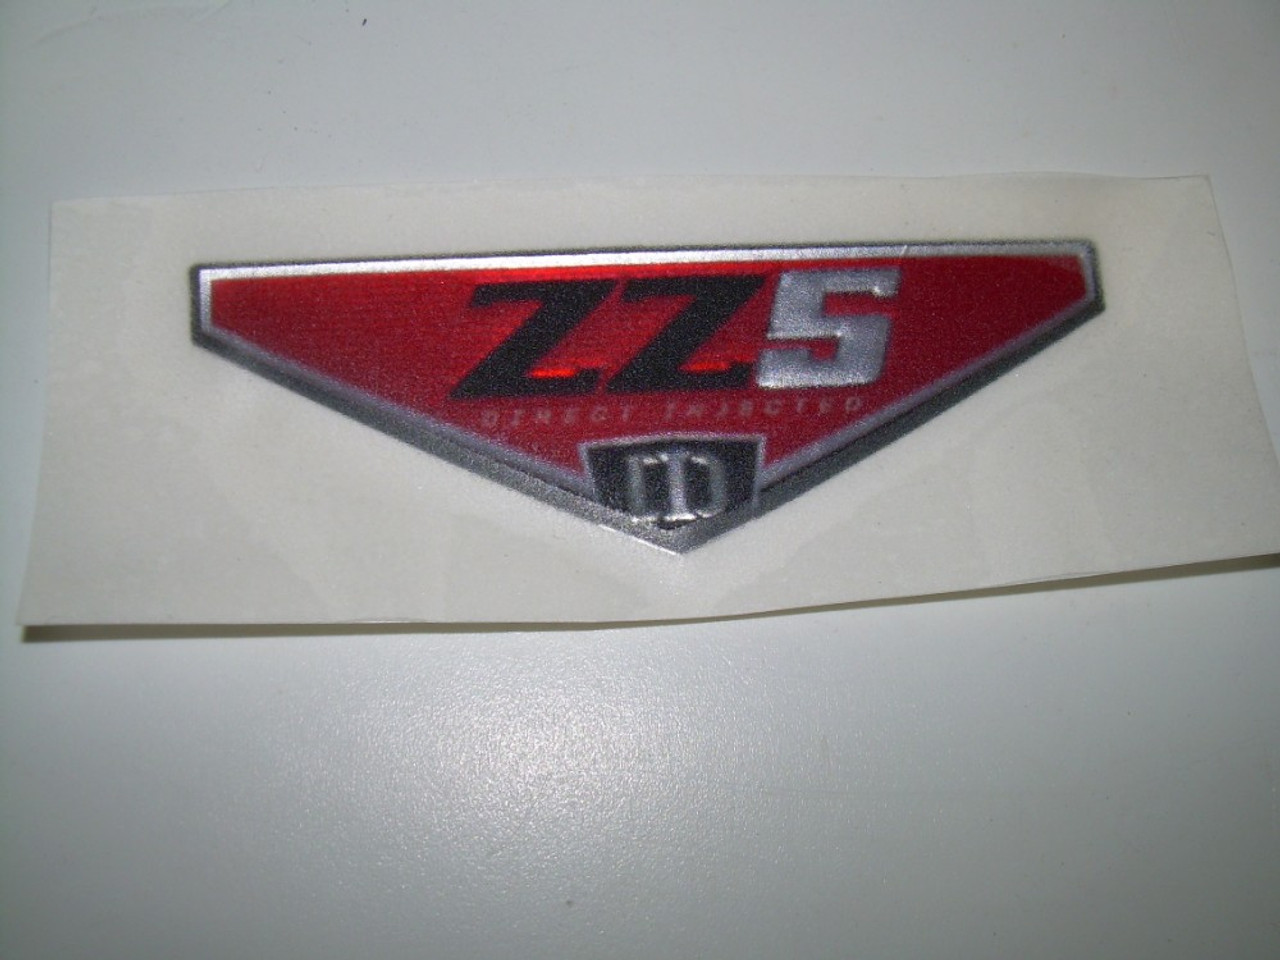 DECAL ZZ5 DOMED INSERT 1.02' X 2.96" RED